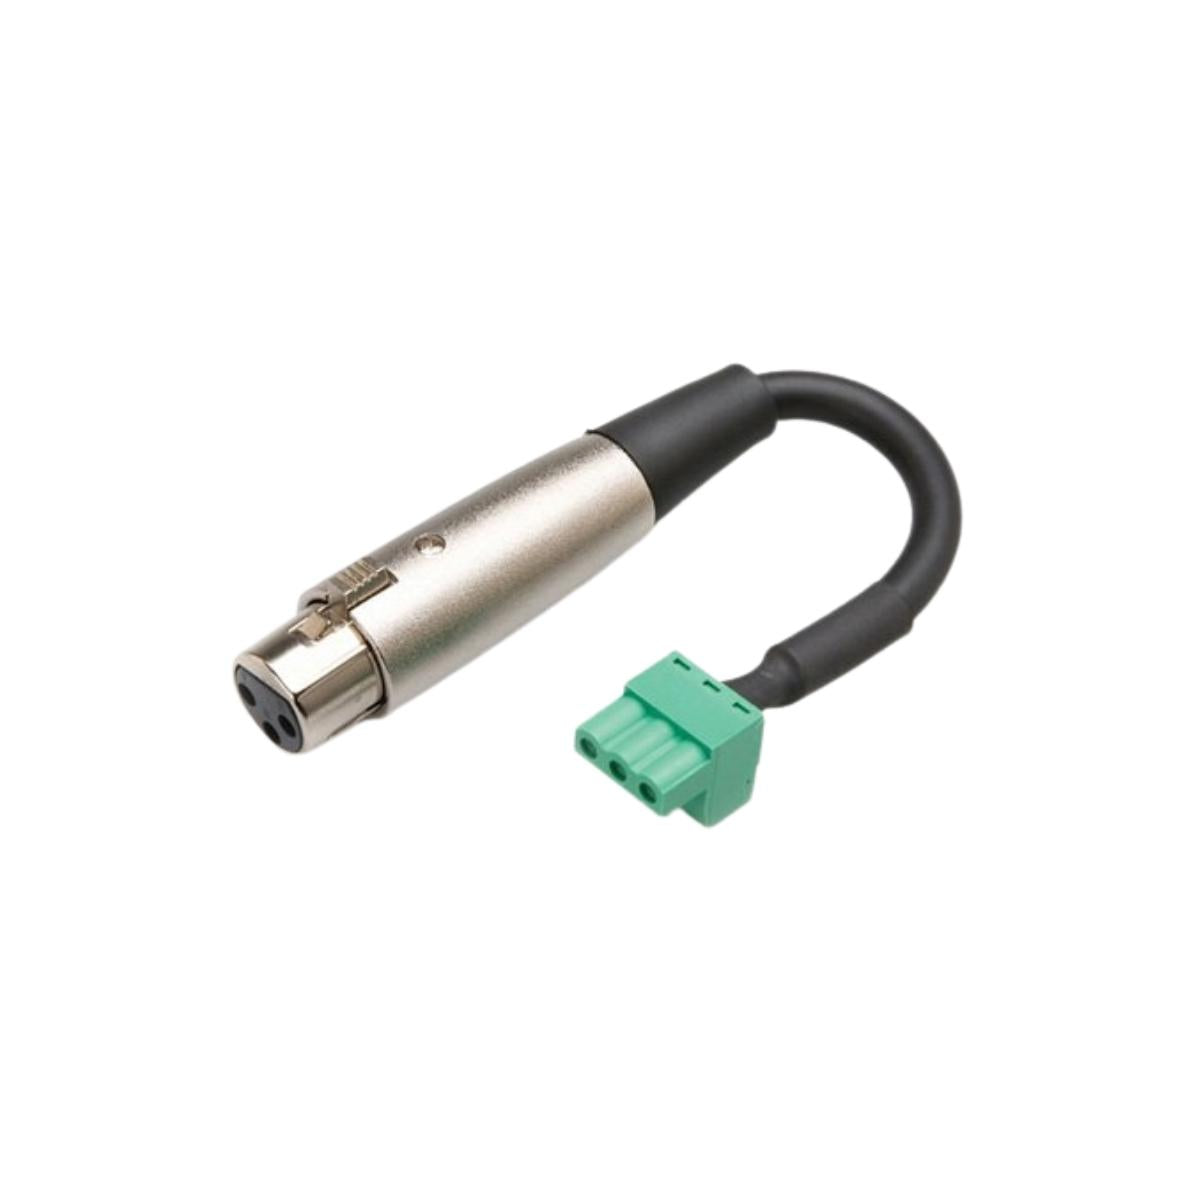 Hosa 6" Low-Voltage Adapter 3-Pin XLR Female to Phoenix Male / Phoenix Male to XLR Female for Mic, Speaker, Amplifier | PHX-206F, PHX-206M